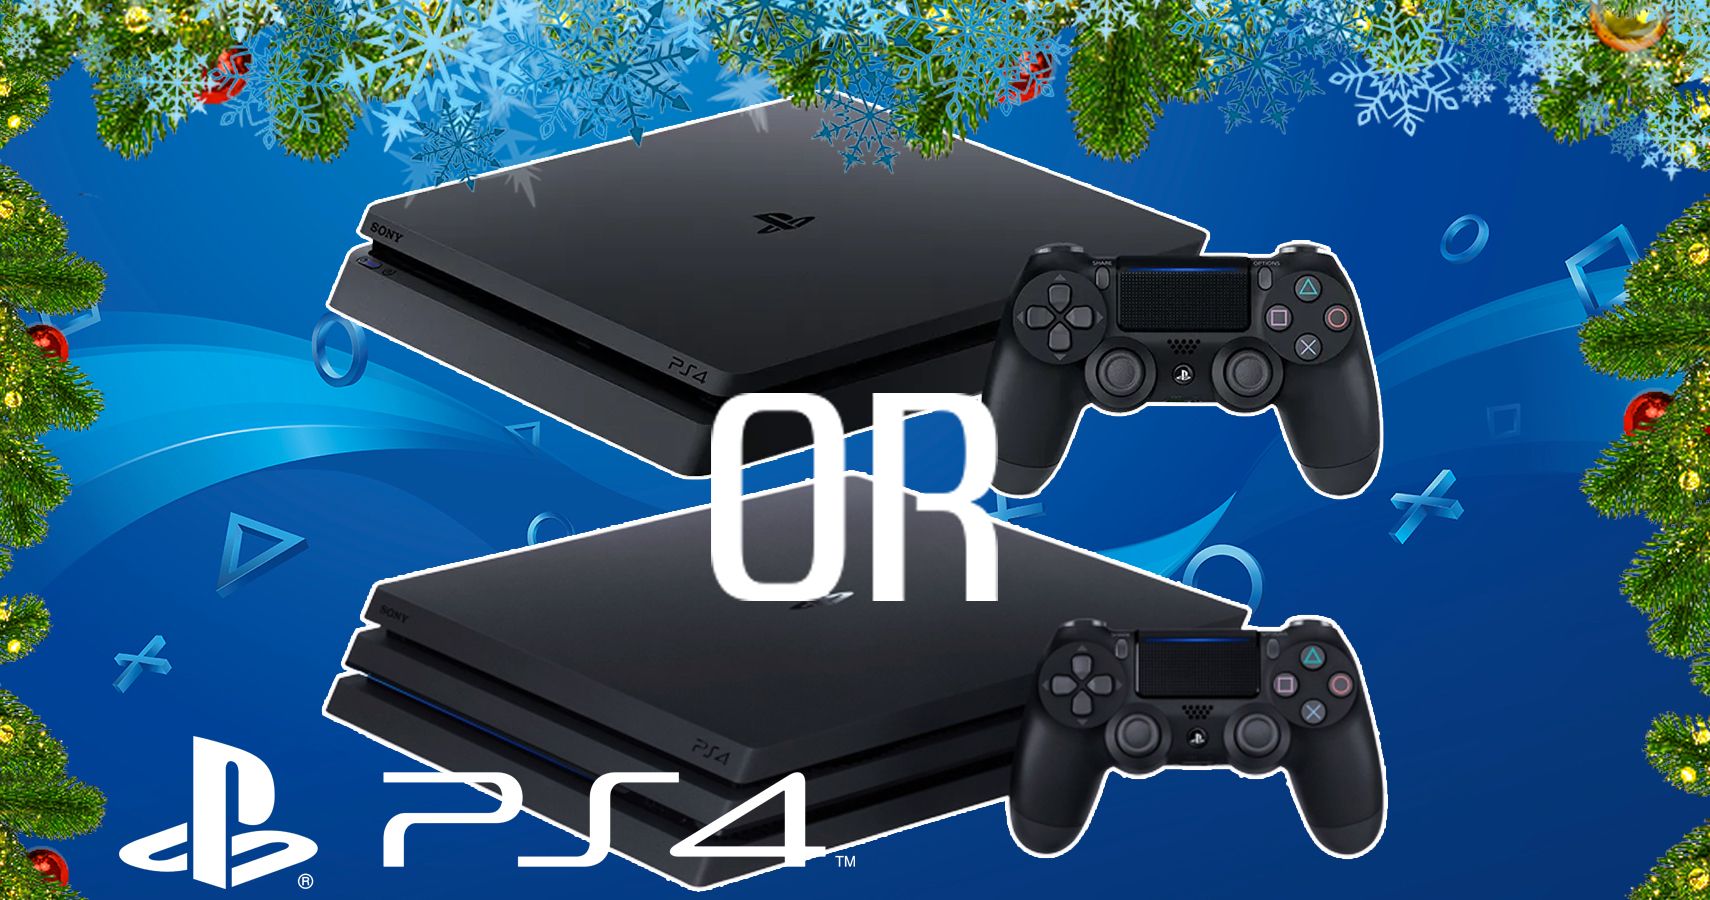 Holiday Gift Guide Should You Buy A PlayStation 4 Slim Or Pro